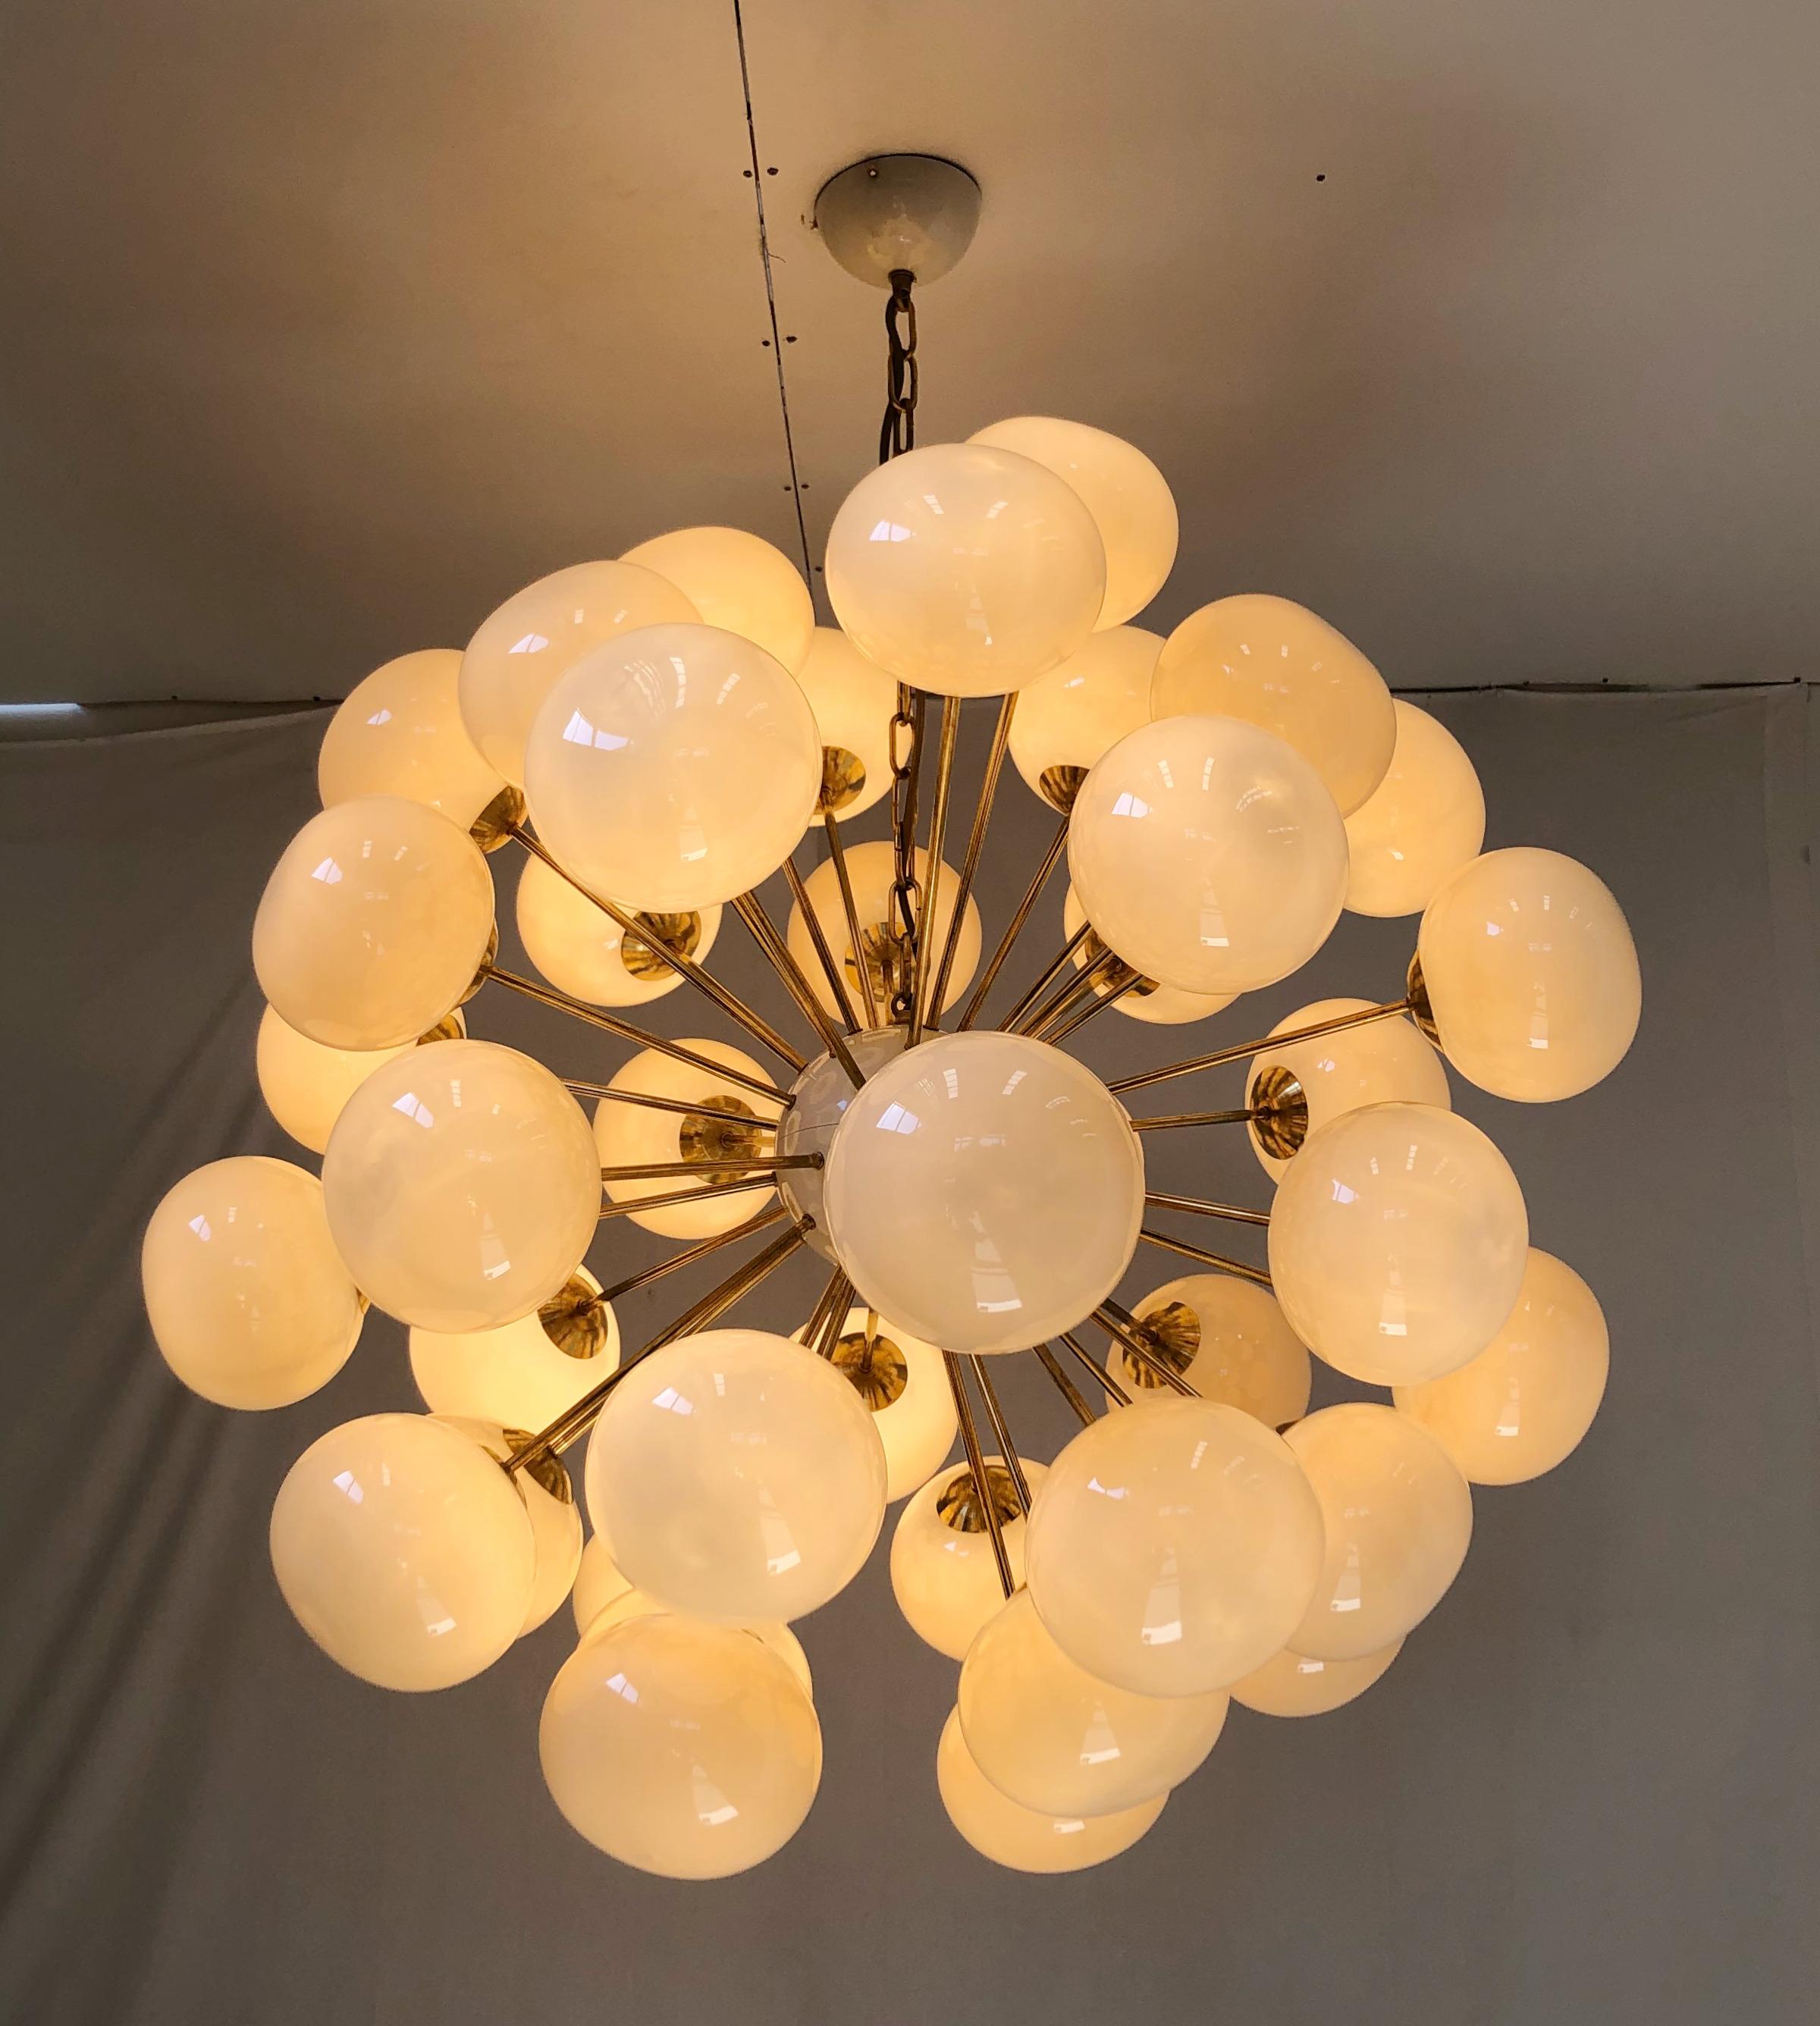 Italian sputnik chandelier with 40 cream Murano glass pebble shades mounted on brass frame / Designed by Fabio Bergomi for Fabio Ltd / Made in Italy
40 lights / E12 or E14 type / max 40W each
Measures: diameter 46 inches / height 46 inches not